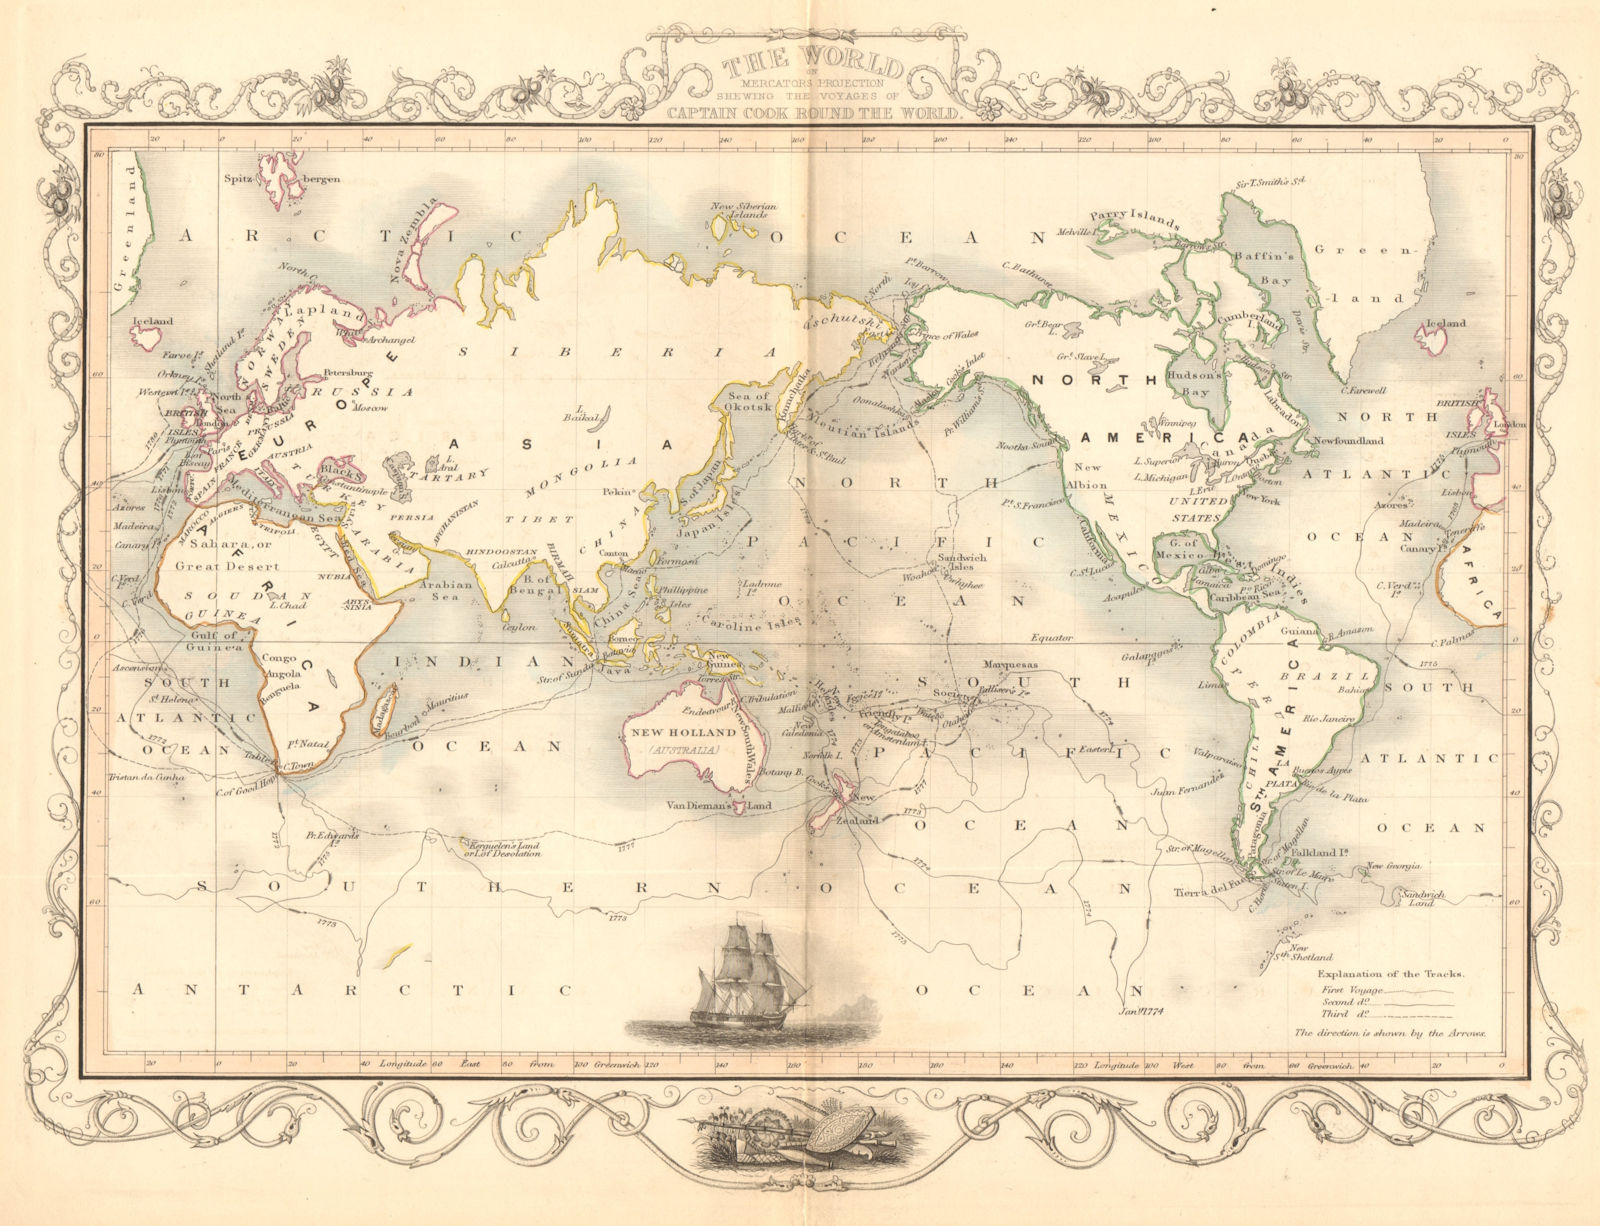 THE WORLD. 'Shewing the voyages of Captain Cook'. TALLIS/RAPKIN 1849 old map